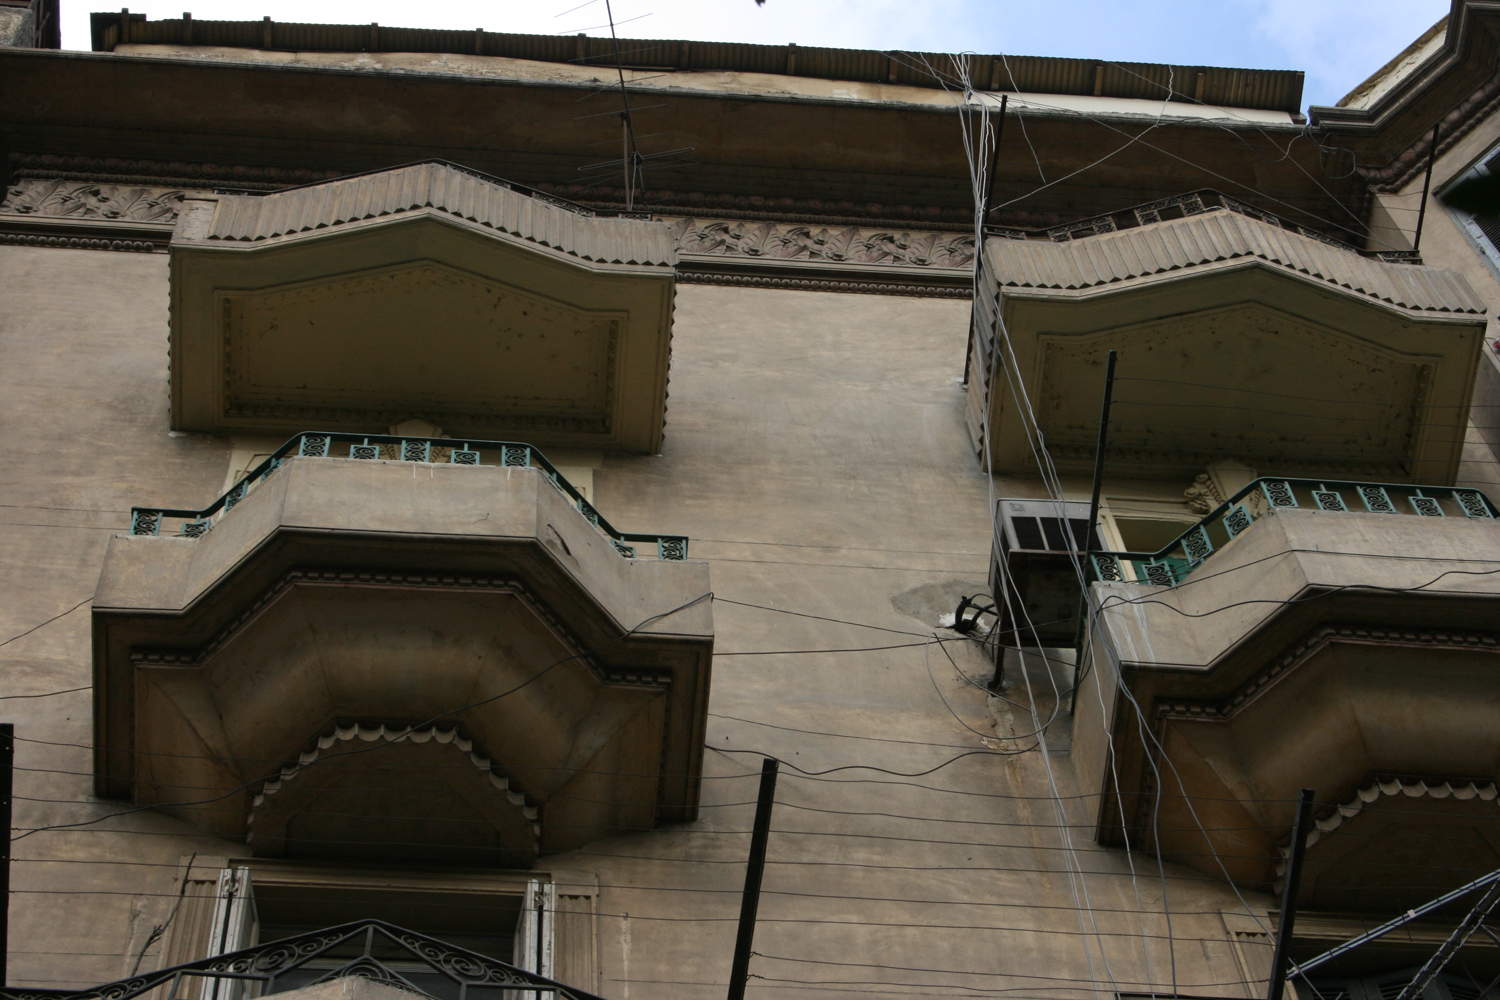 Detail of the facade with various typologies of balconies